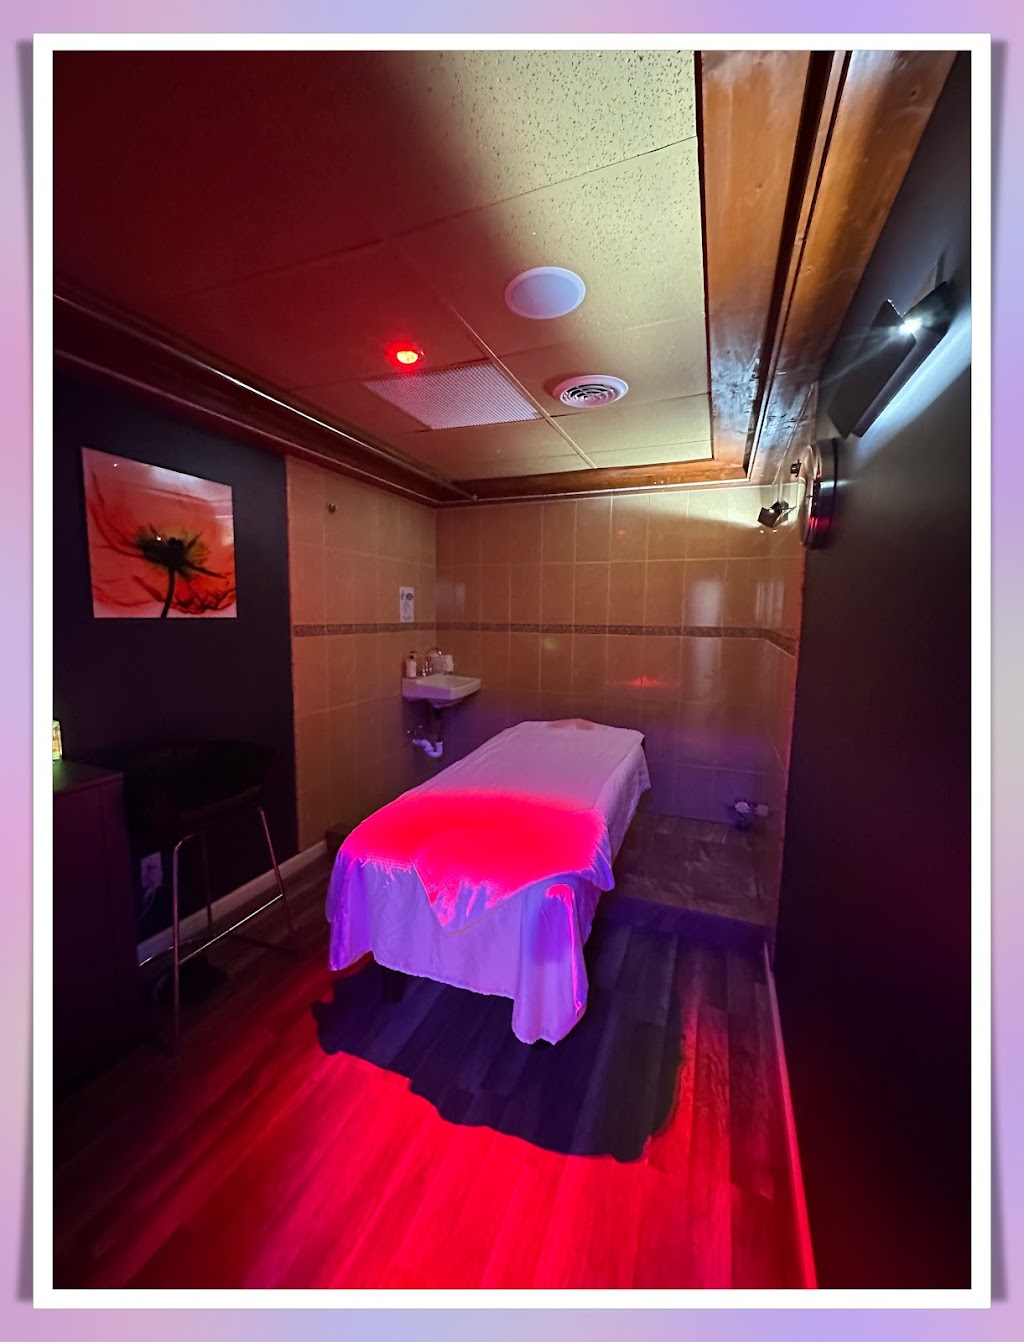 New Palace Spa | 116 S Central Ave #2Fl, Elmsford, NY 10523 | Phone: (914) 821-0999